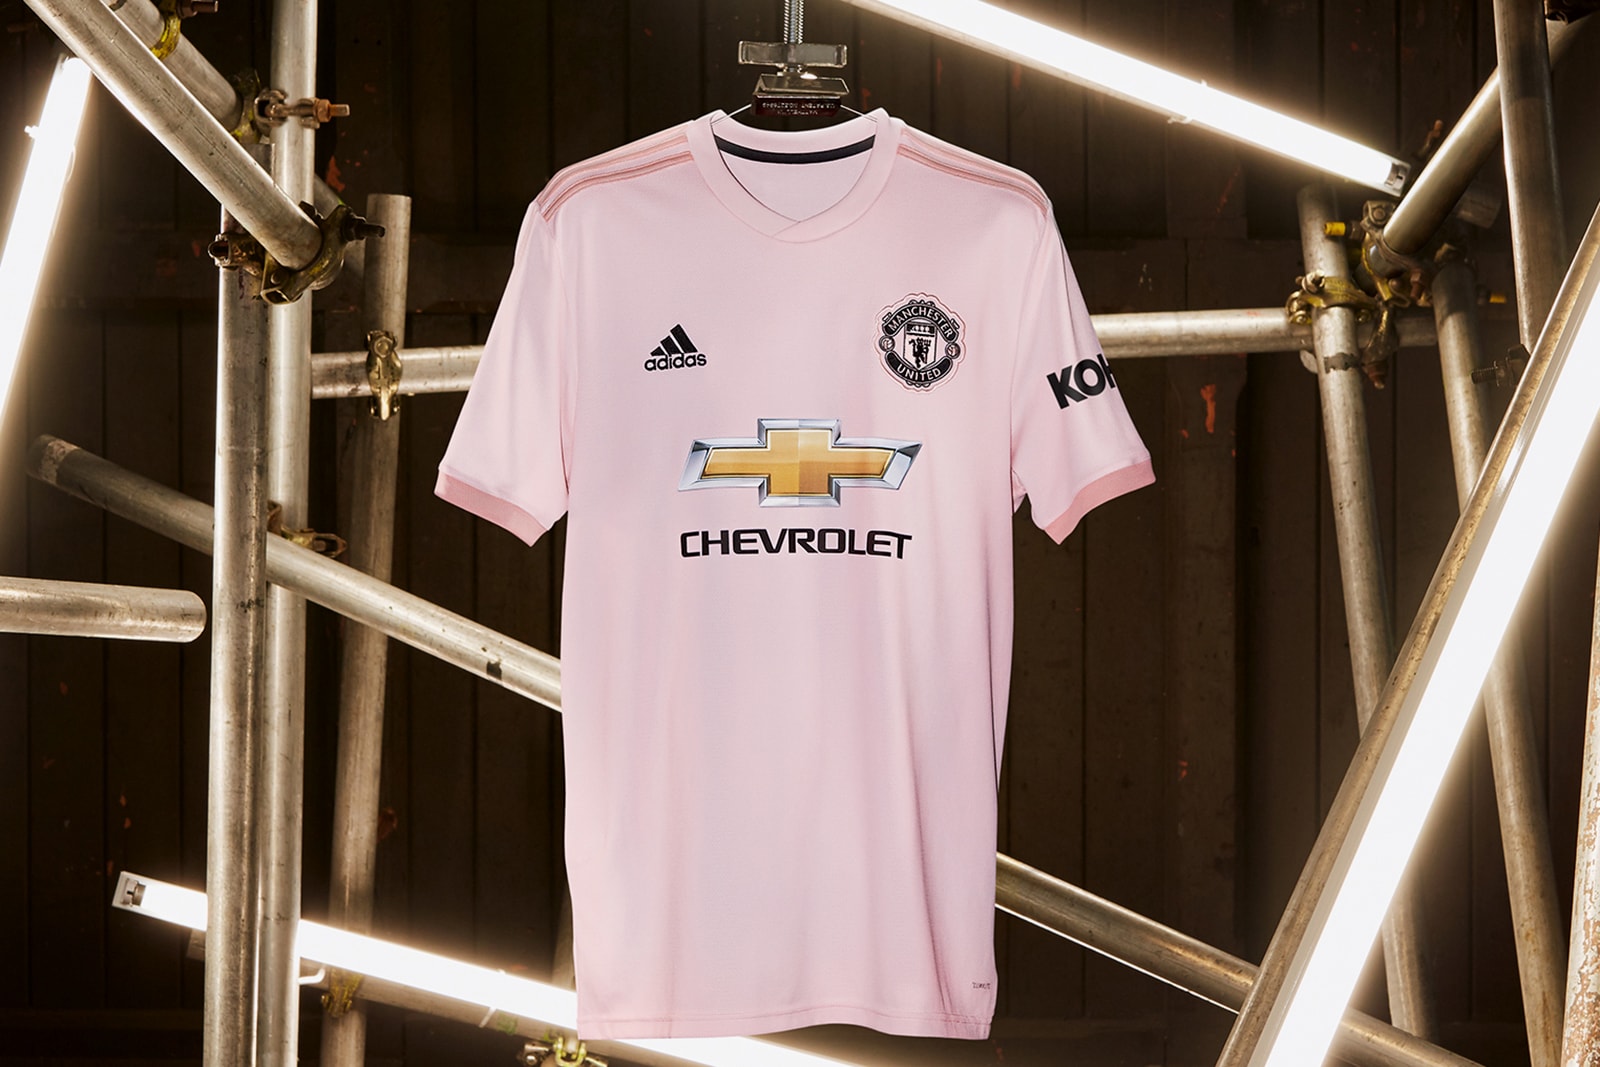 adidas Football Manchester United 2018/19 Jersey Release Details Cop Purchase Buy Clothing Fashion Sports Soccer